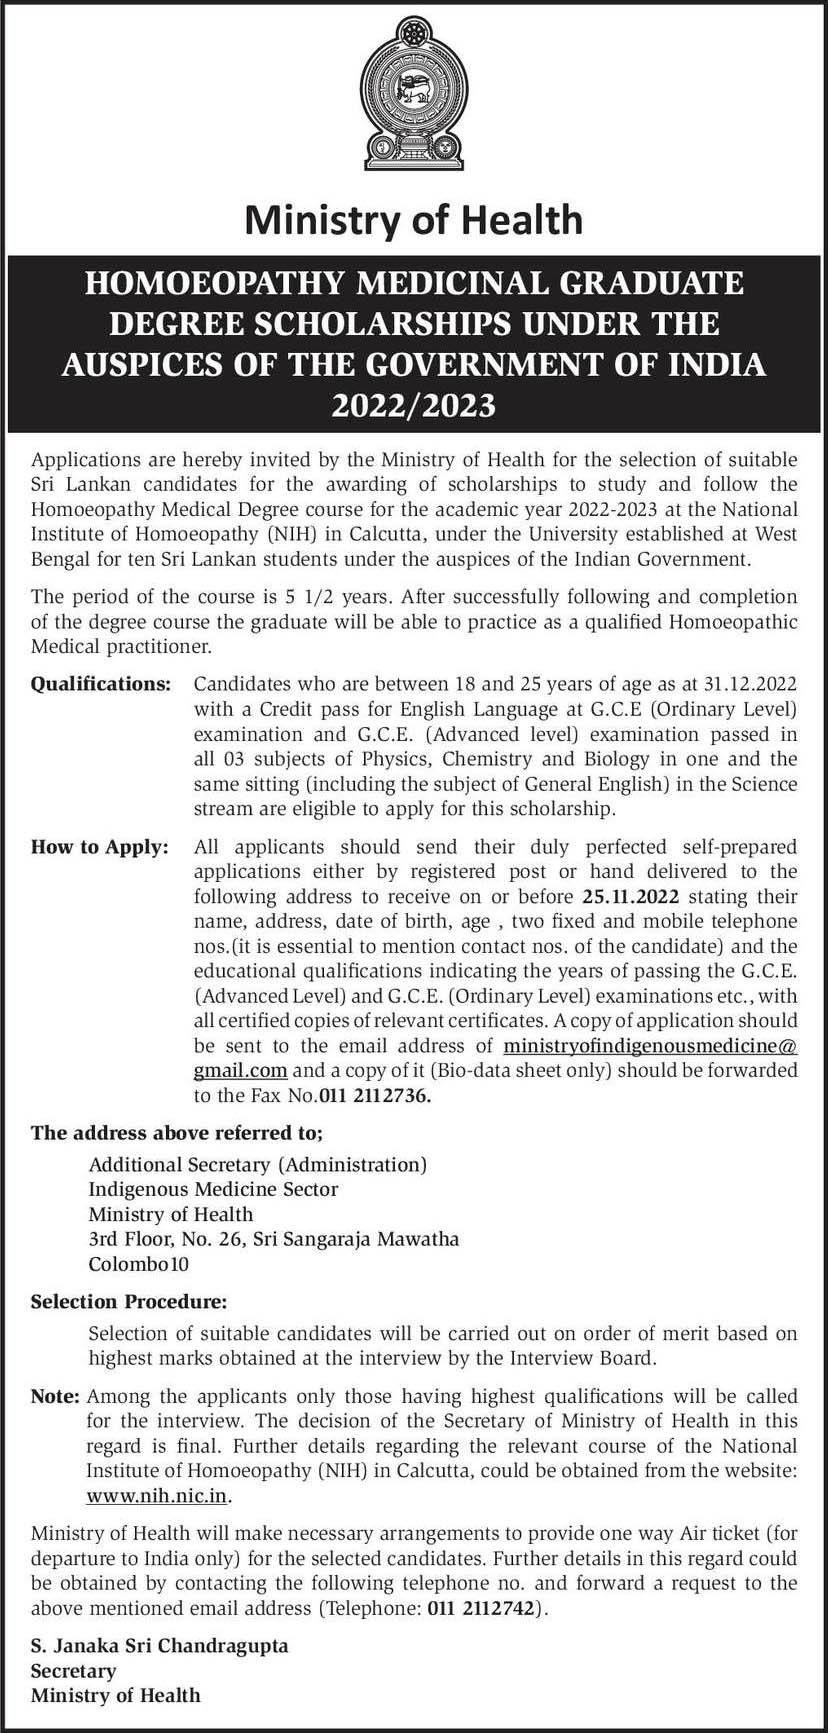 Homoeopathy Medicinal Graduate Degree Scholarships Under the Auspices of The Government of India - 2022/2023 - Ministry of Health, Sri Lanka